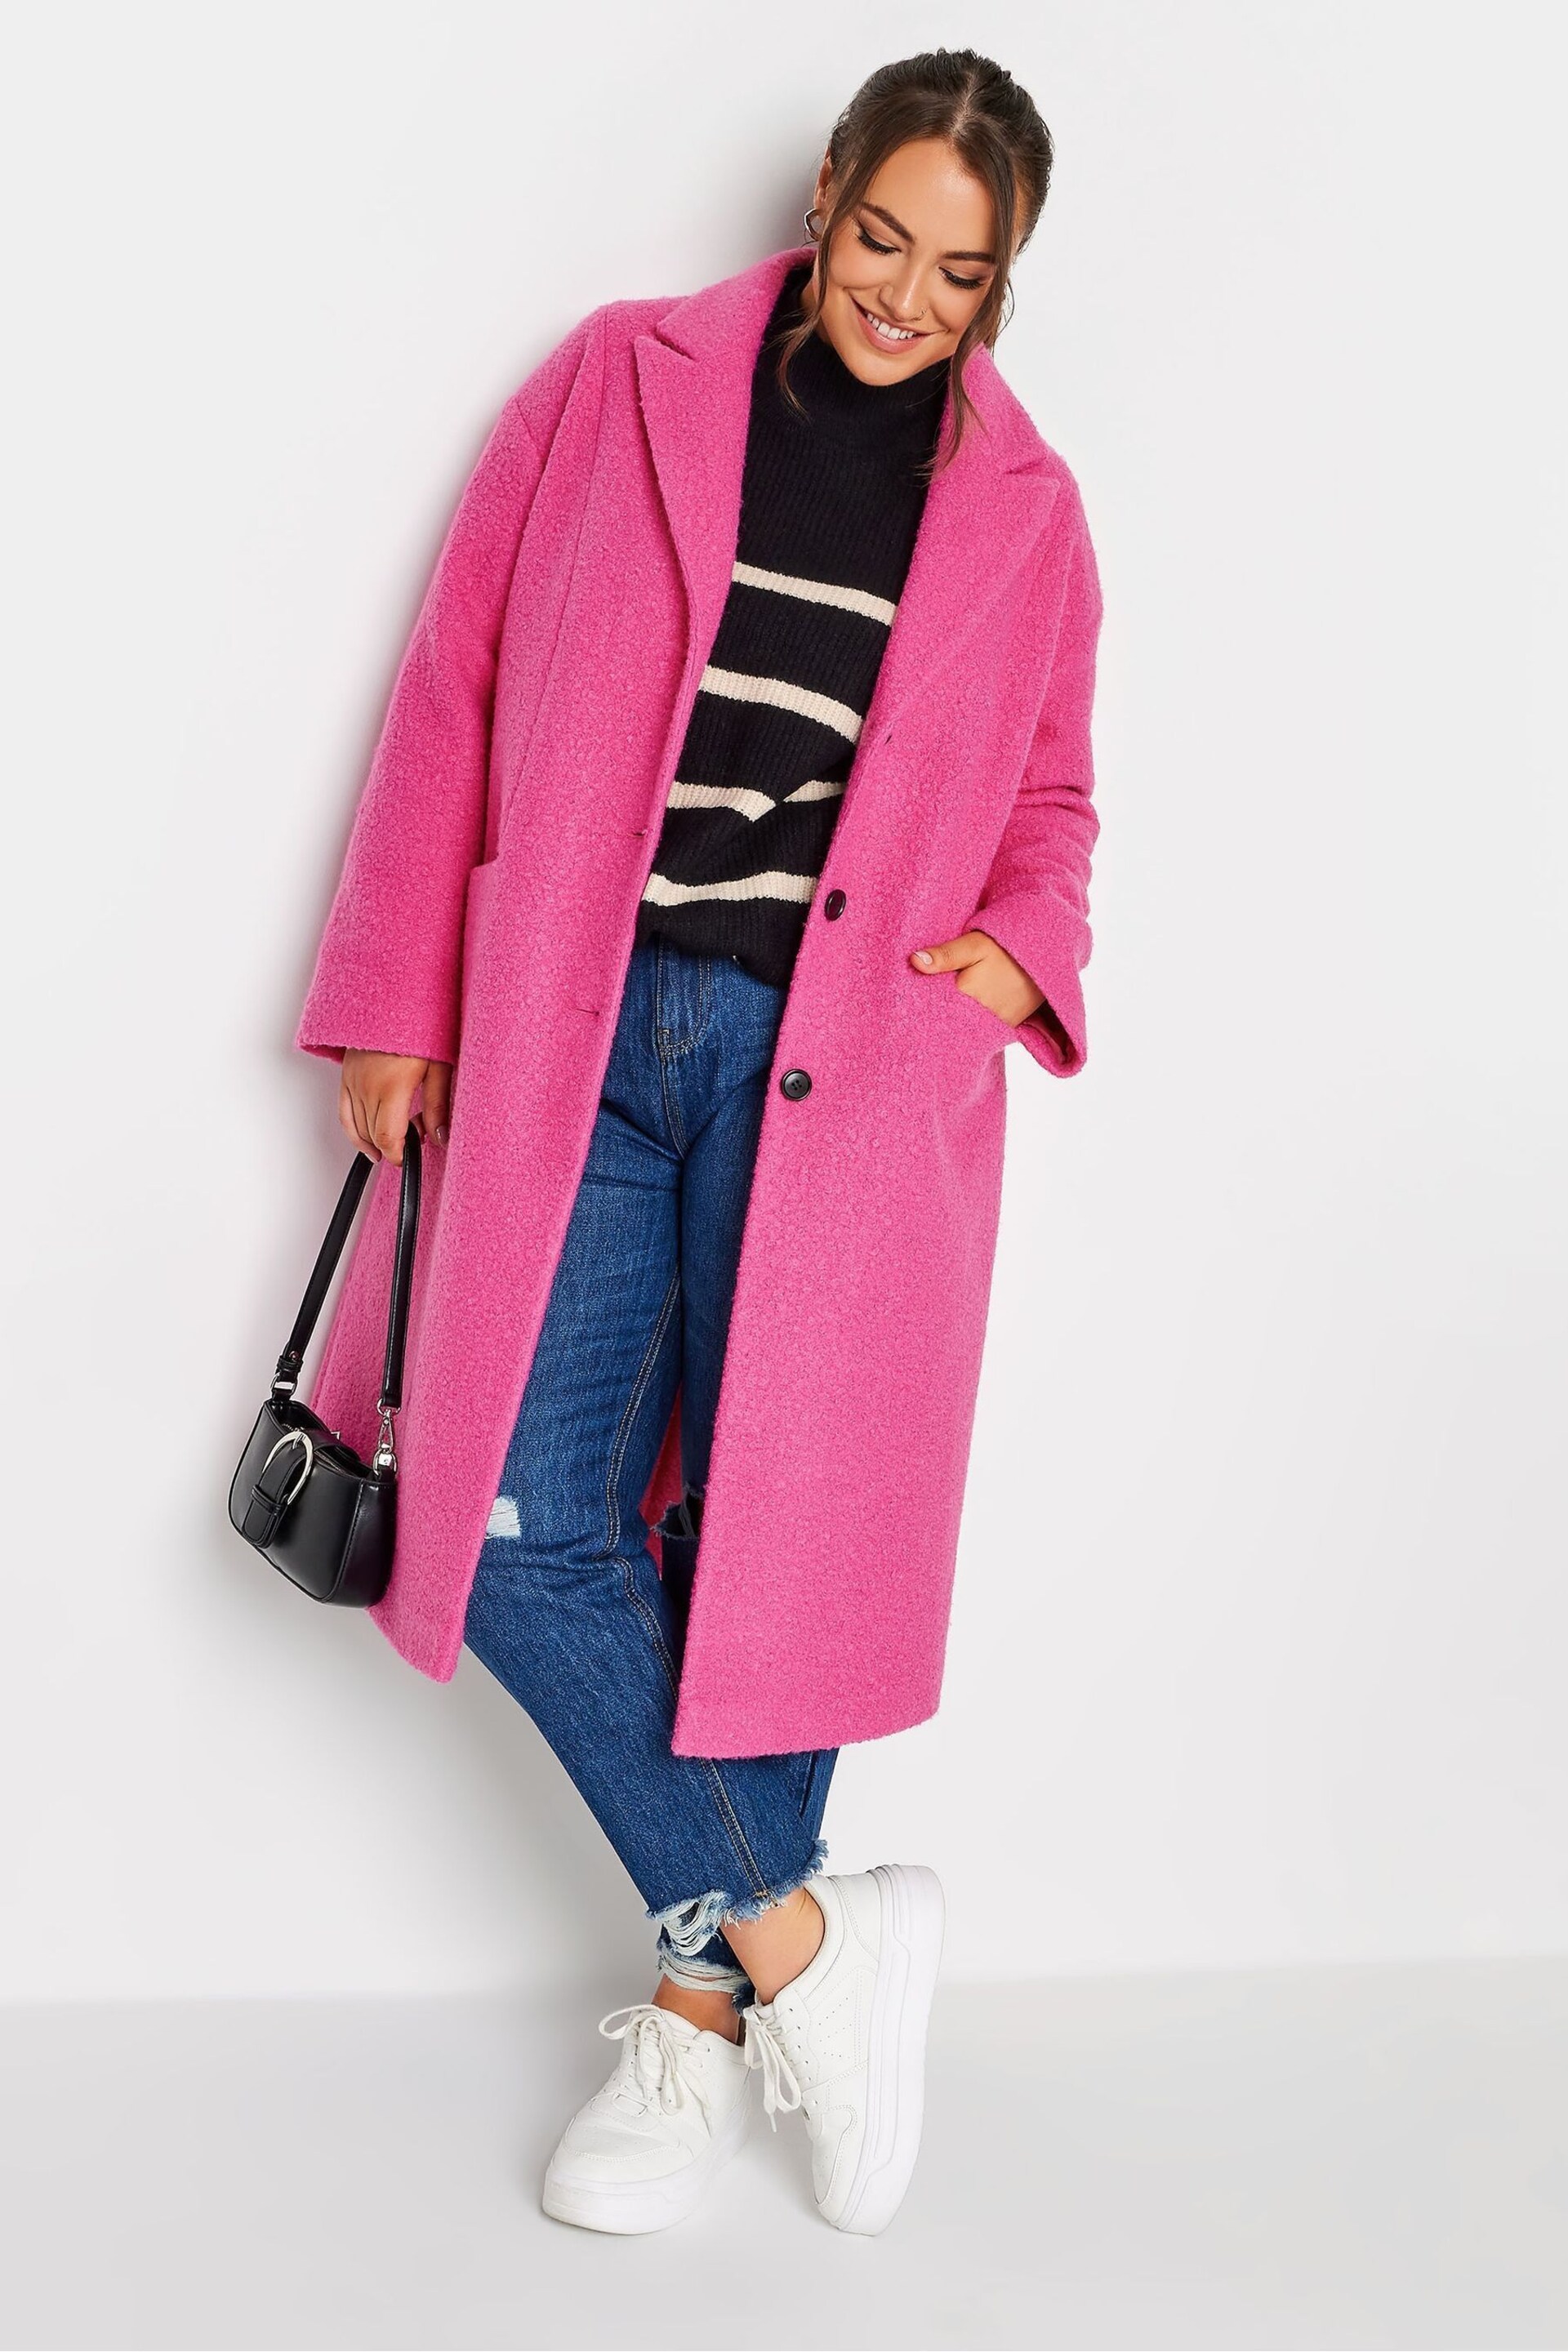 Yours Curve Pink Curly Boucle Coat - Image 4 of 5